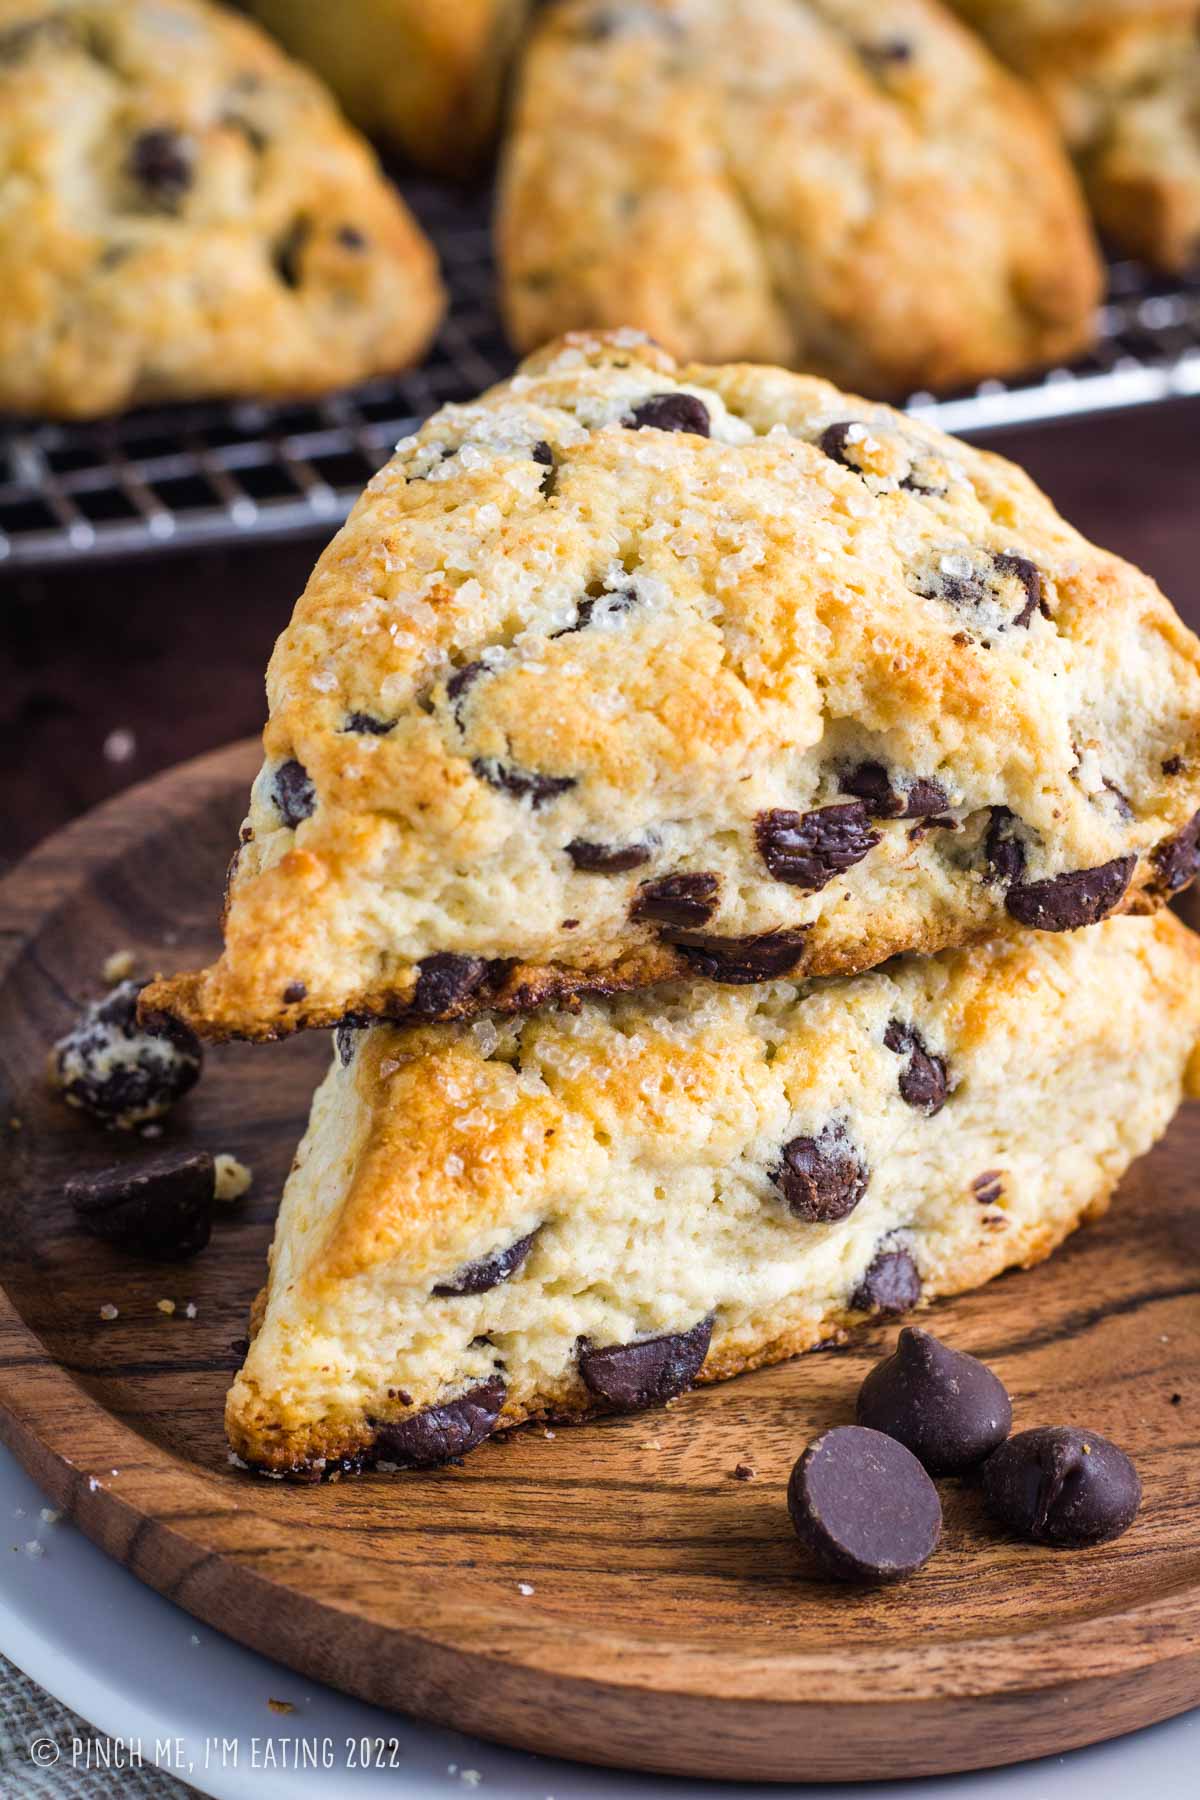 Two dark chocolate chip scones stacked on a wooden plate.